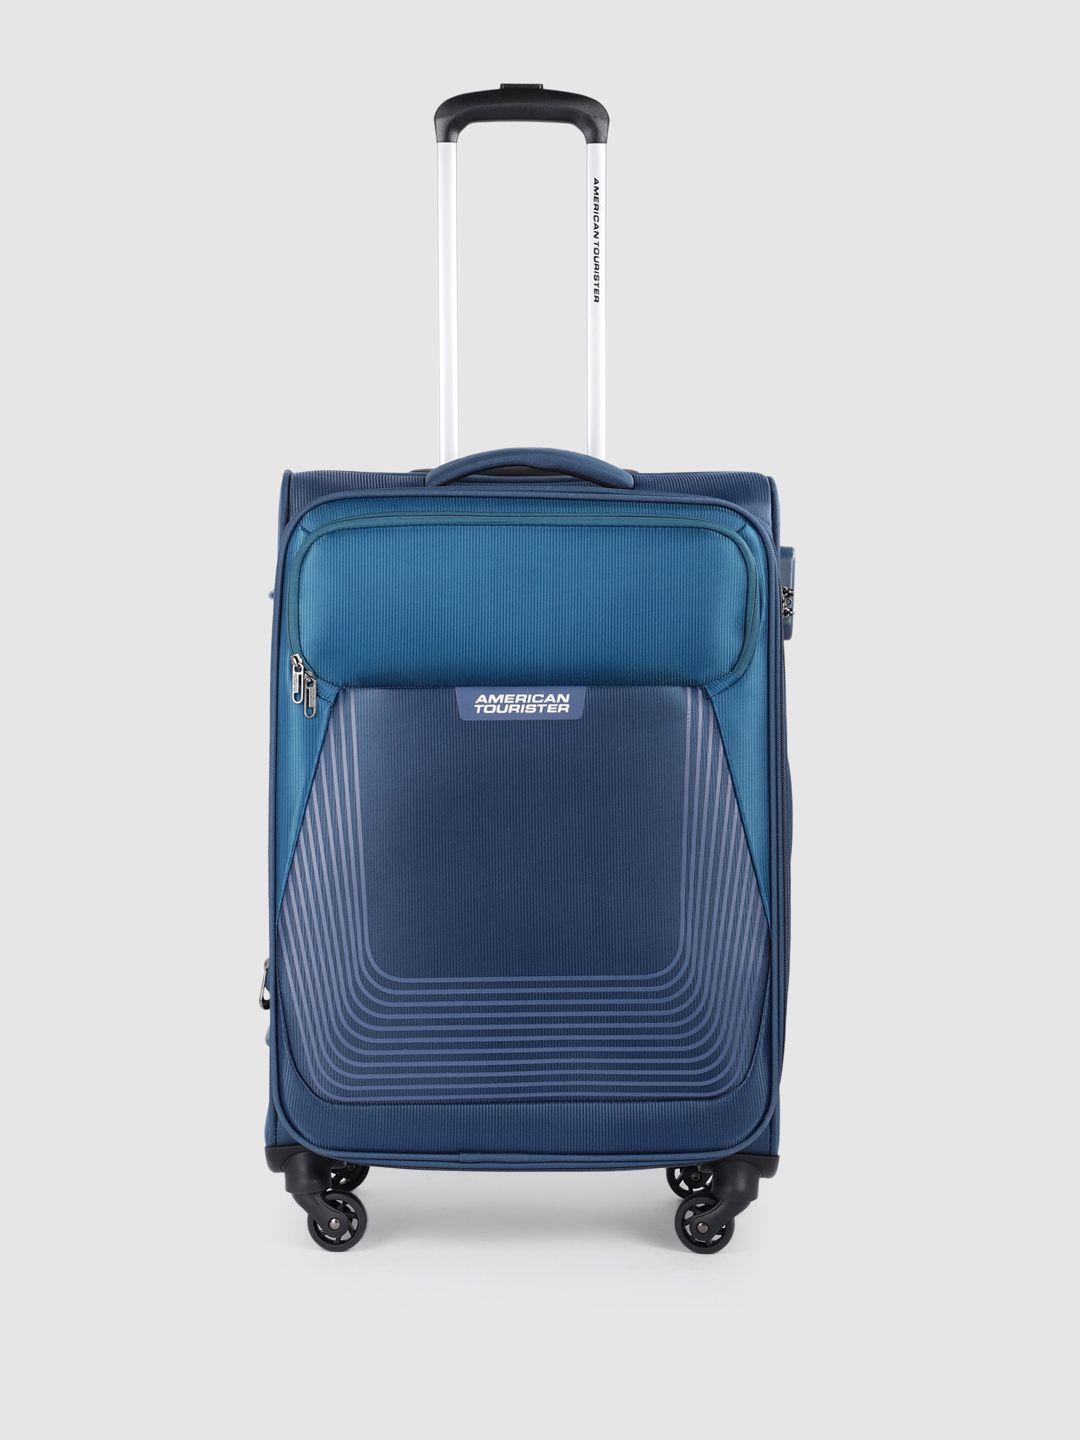 american-tourister-southside-lite-medium-trolley-suitcase